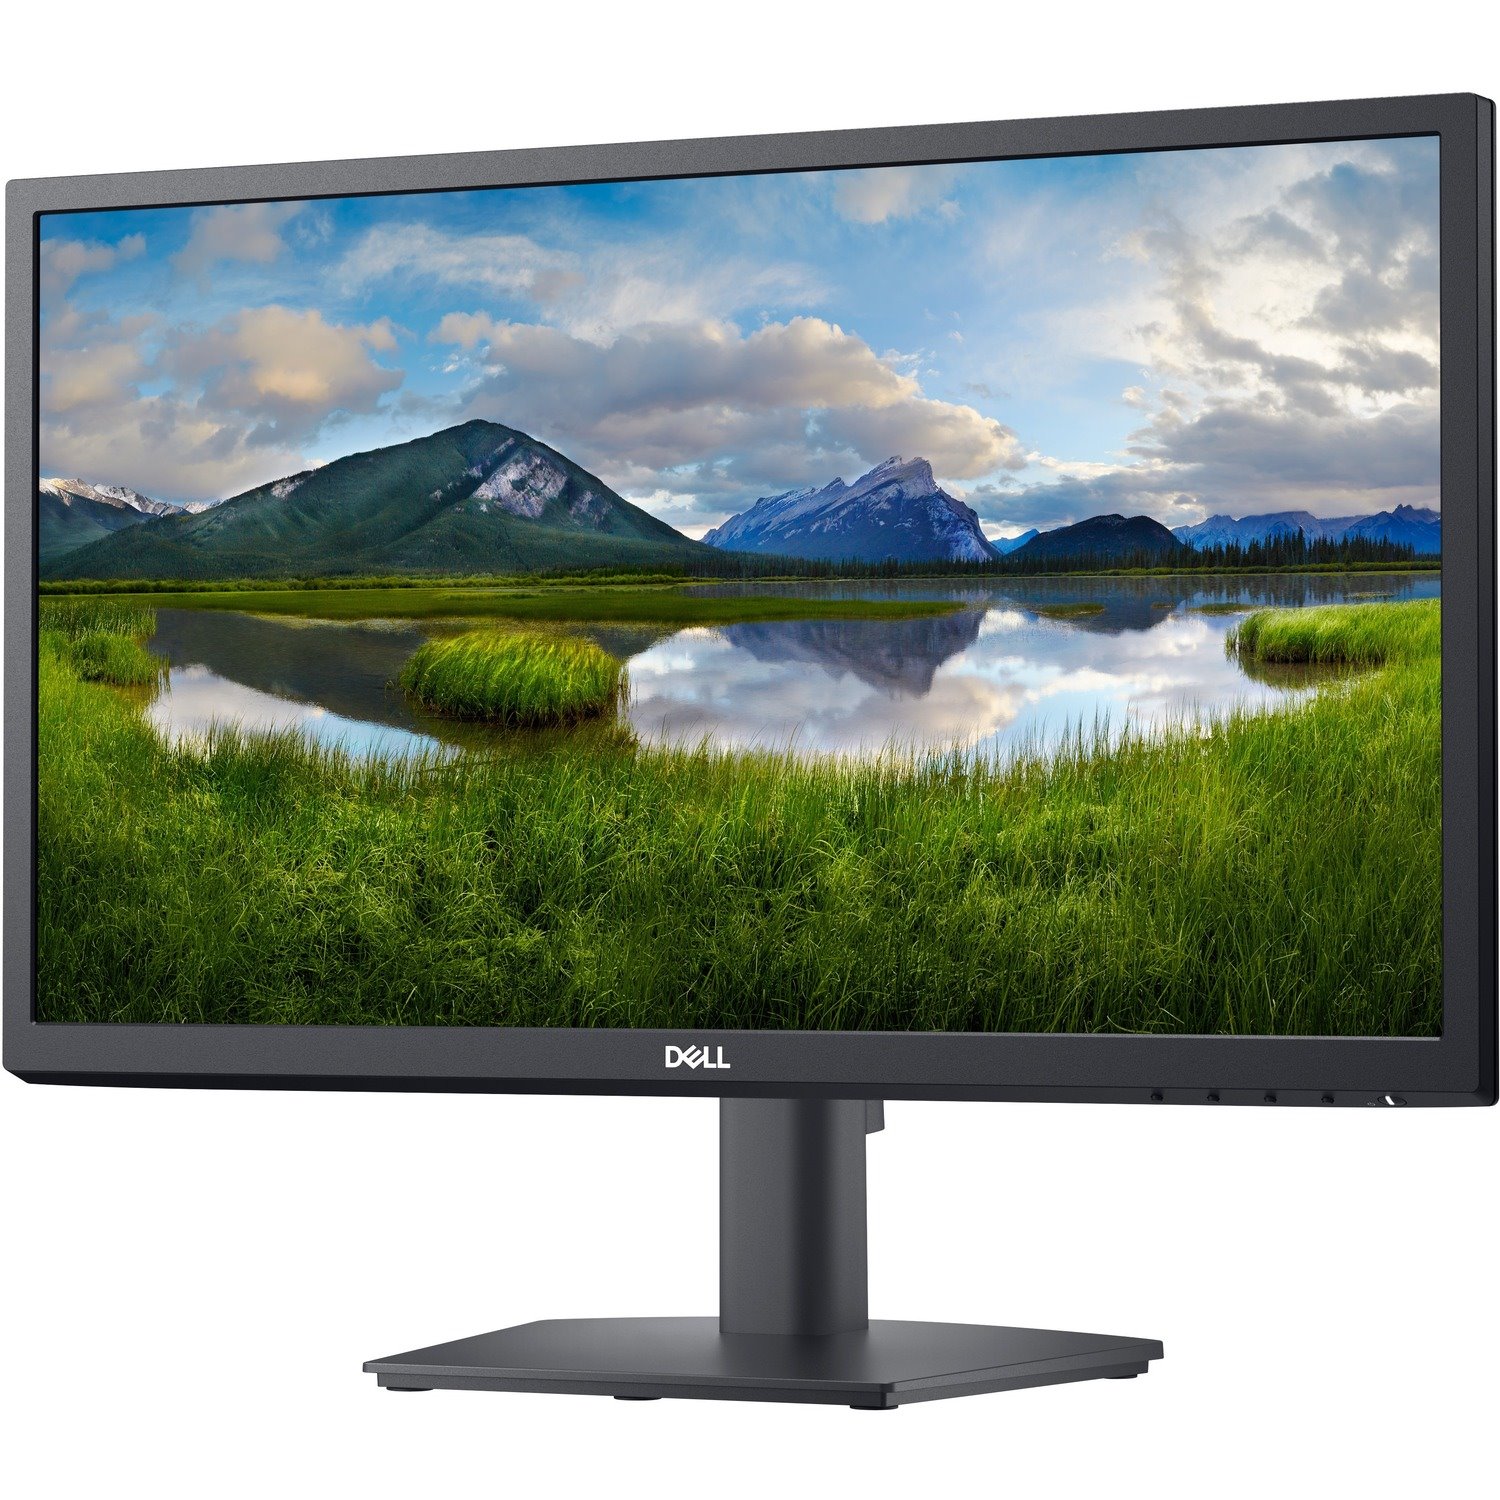 Dell Entry E2222H 21.5" Full HD WLED LCD Monitor - 16:9